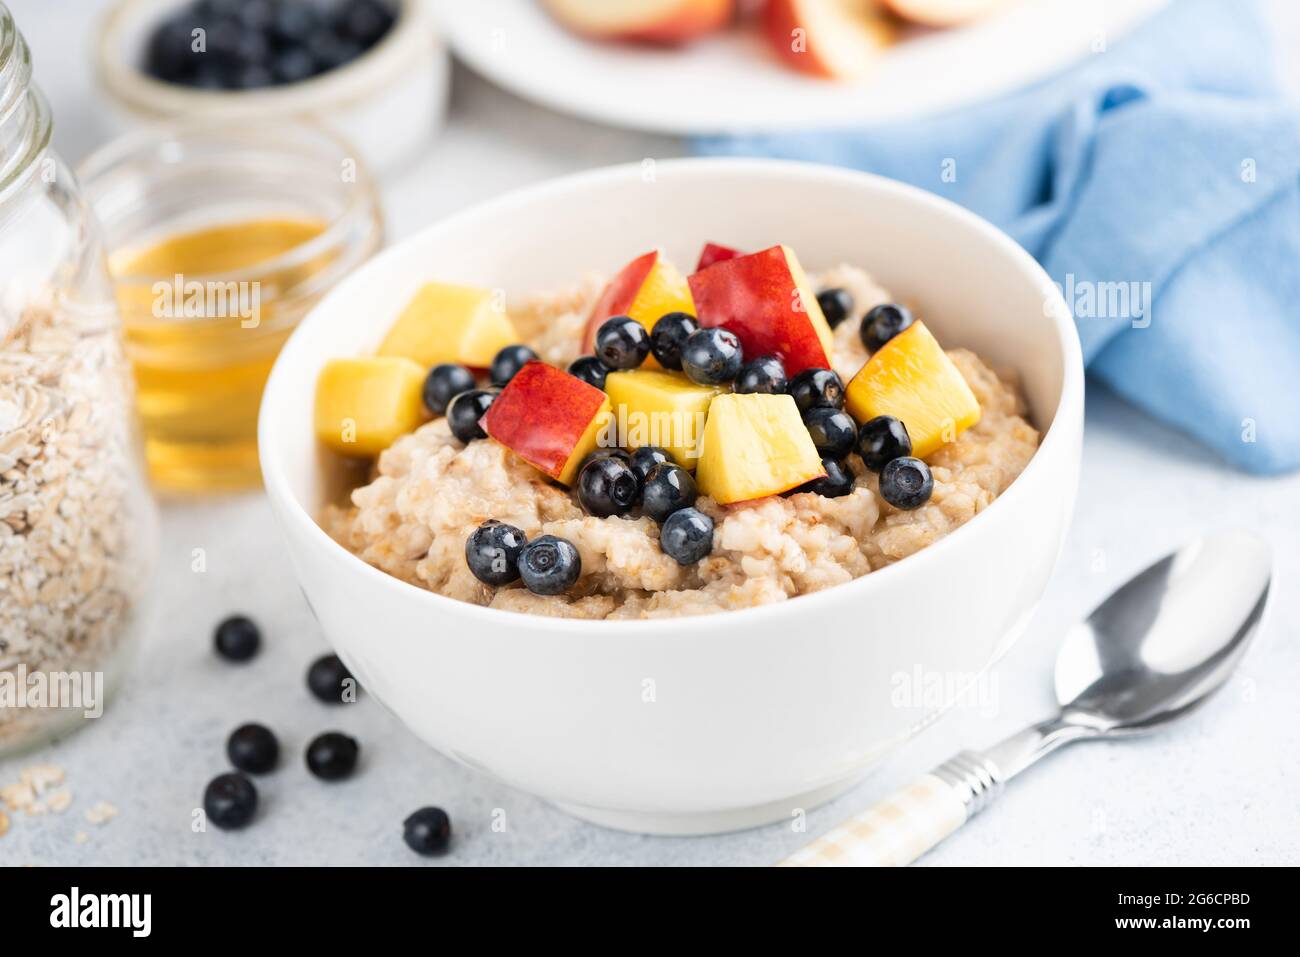 Healthy vegetarian breakfast food oatmeal porridge with fruits and honey. Weight loss, clean eating lifestyle concept Stock Photo